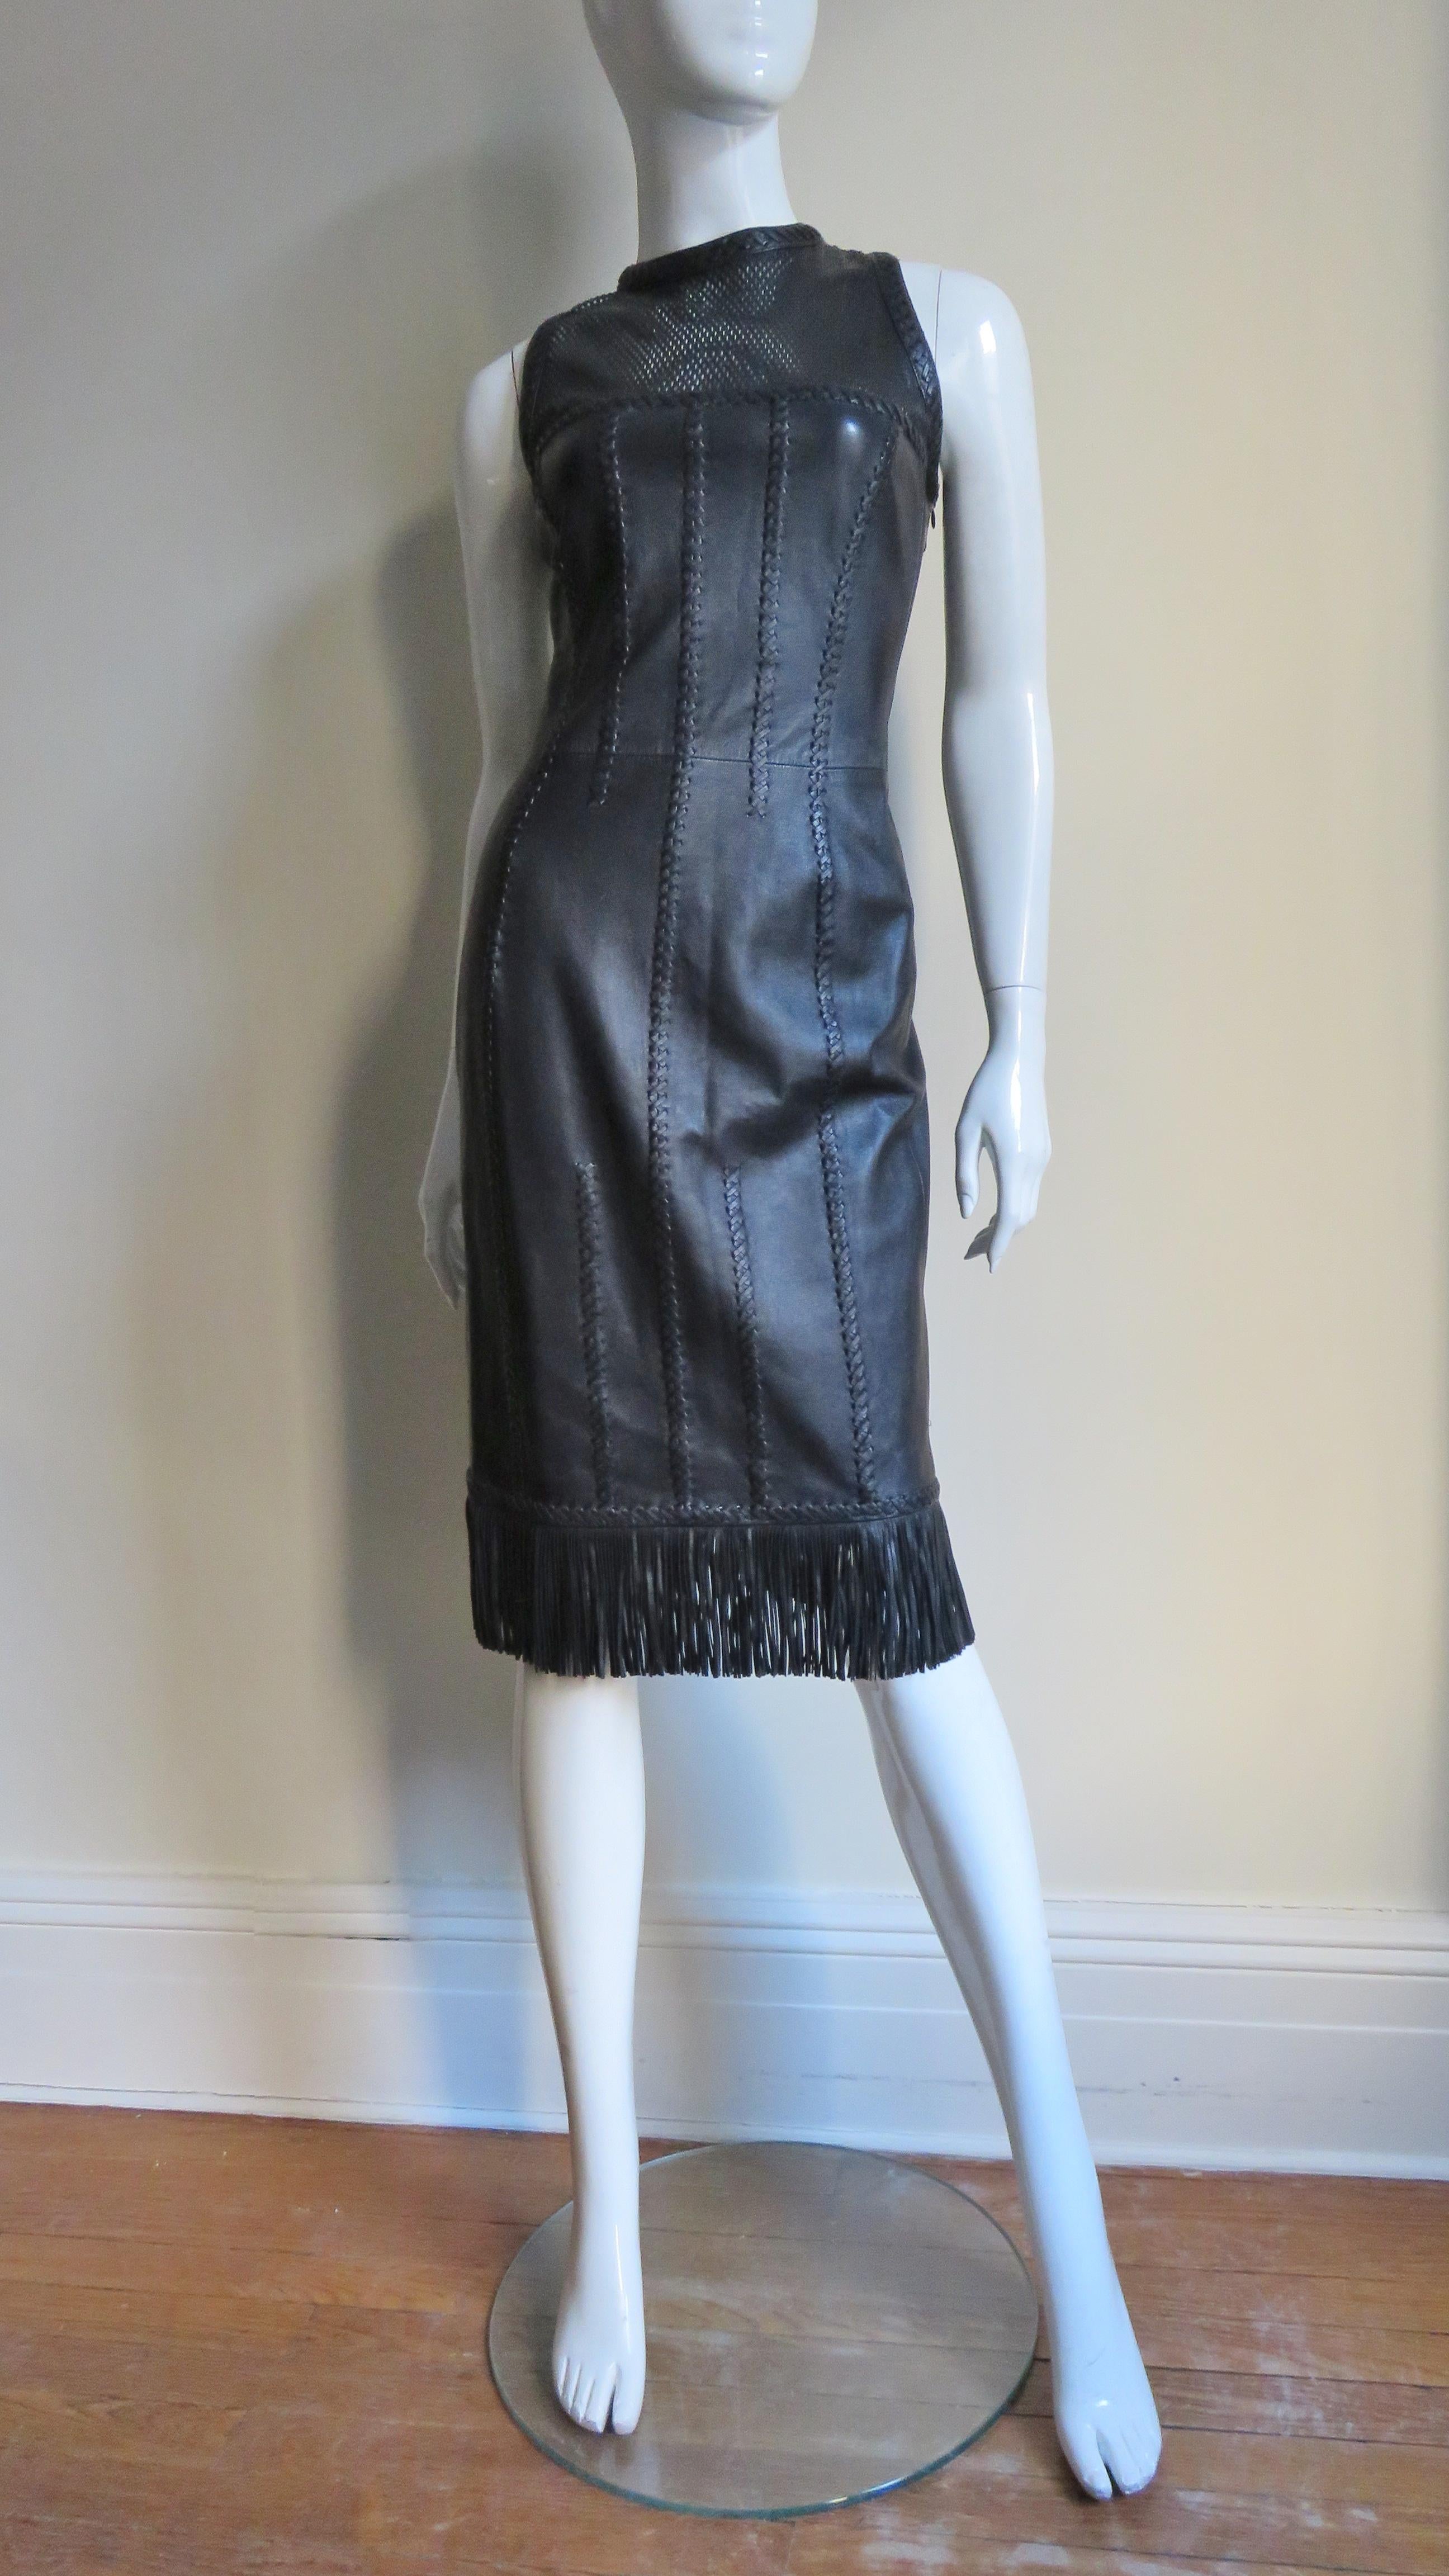  Gianni Versace Leather Lace up Dress S/S 2002 For Sale 4